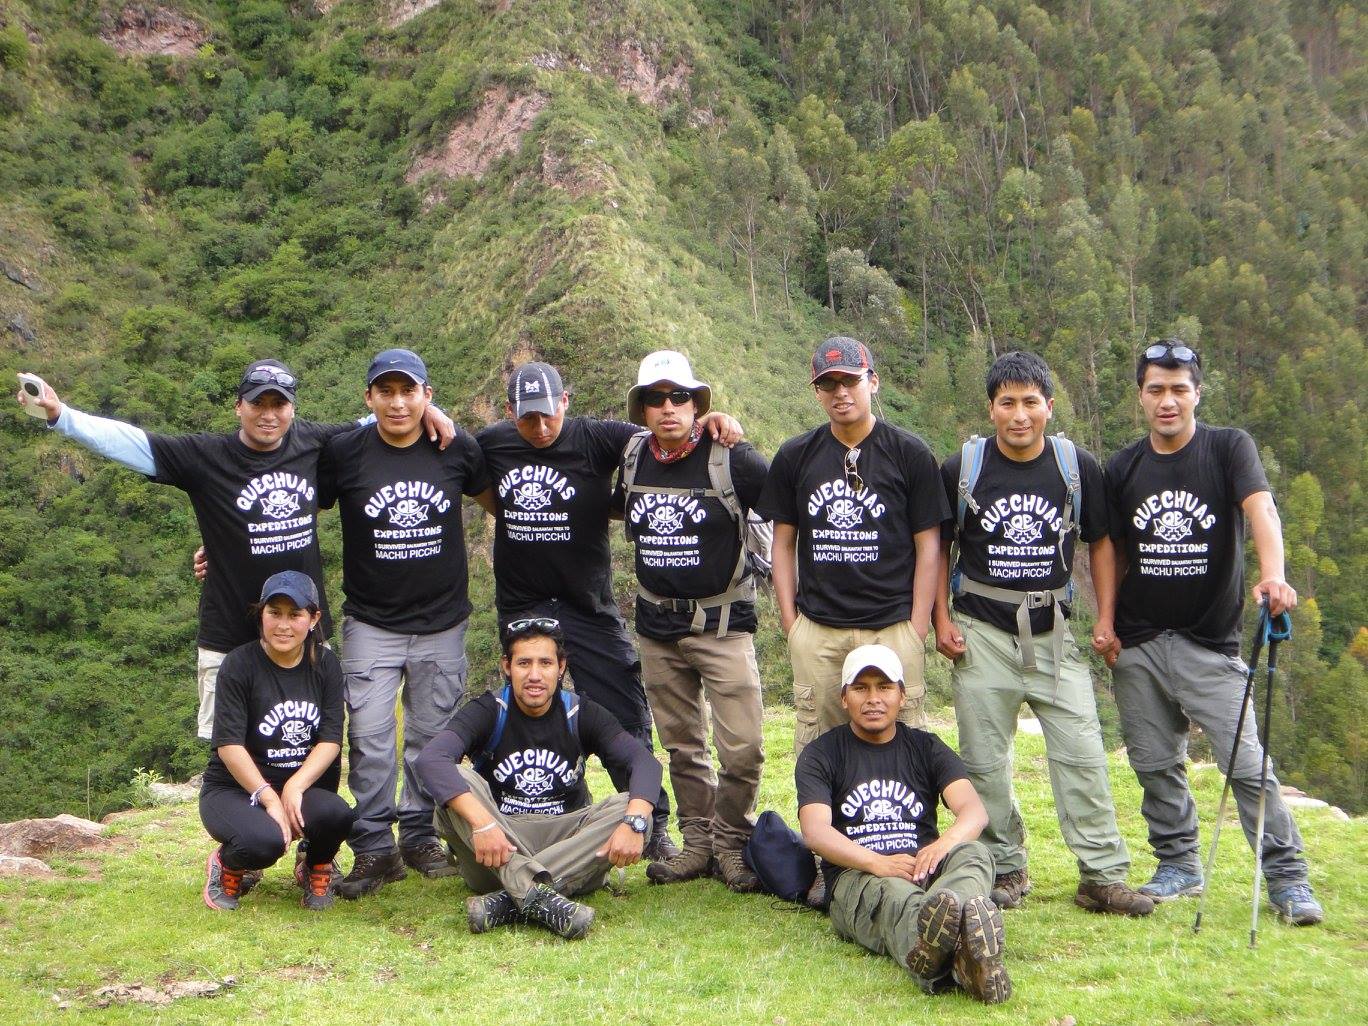 About Quechuas Expeditions